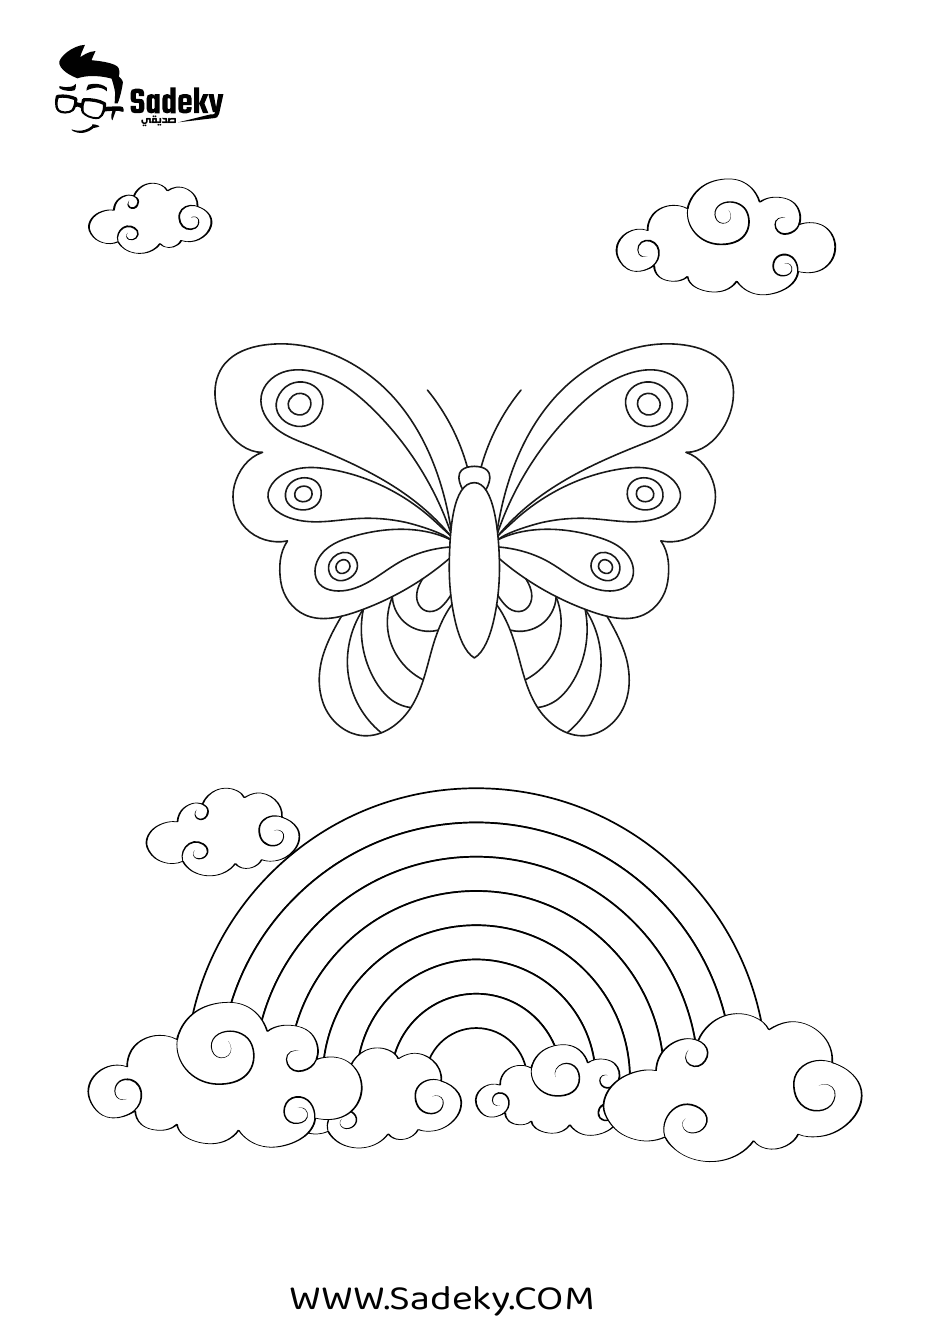 Rainbow Butterfly Coloring Page, Page 1